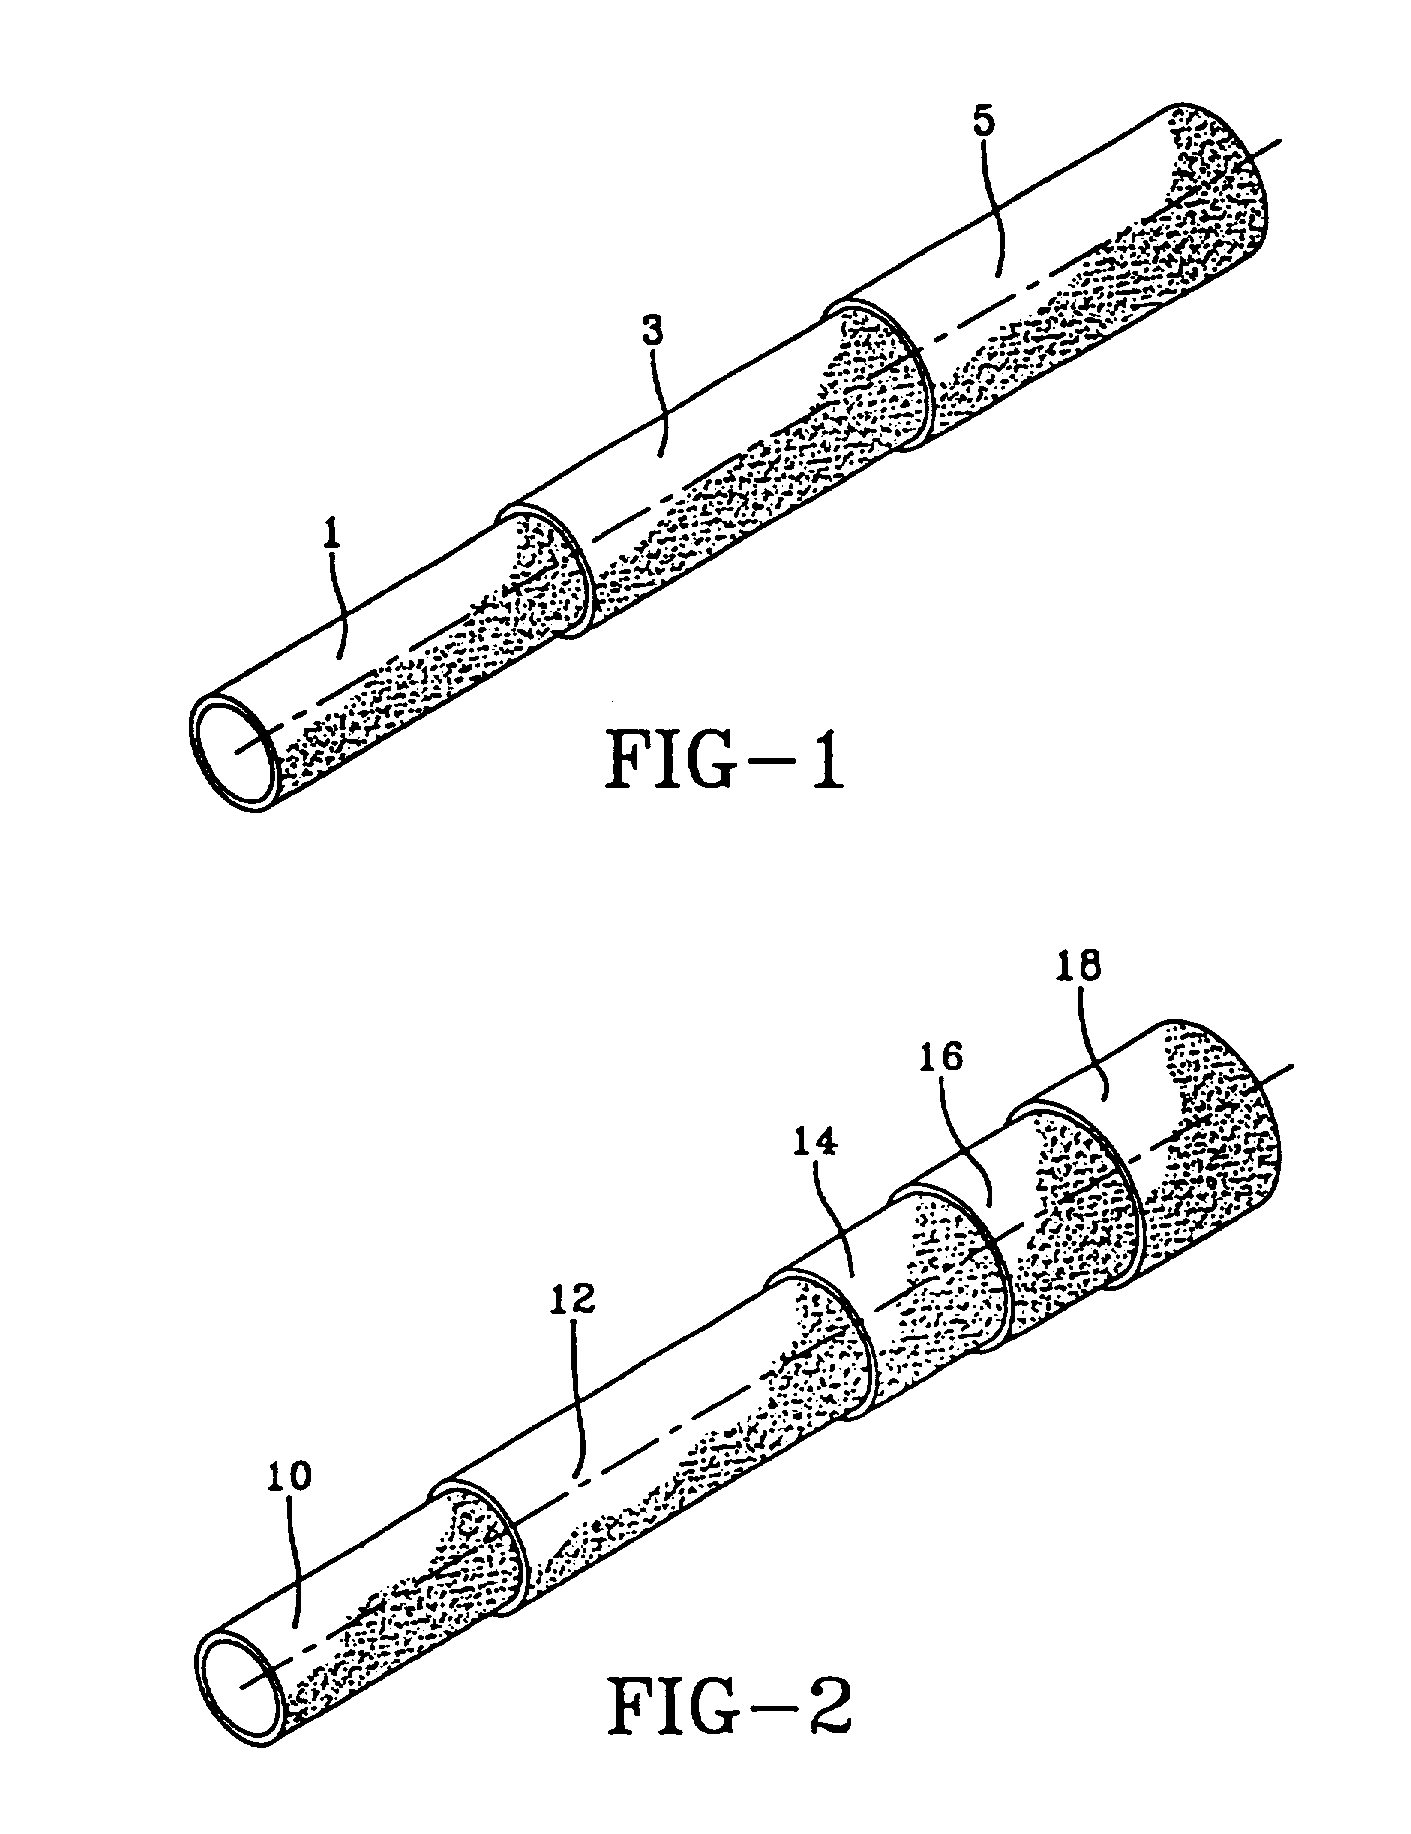 Hose construction containing fluoroelastomer composition and fluoroplastic barrier